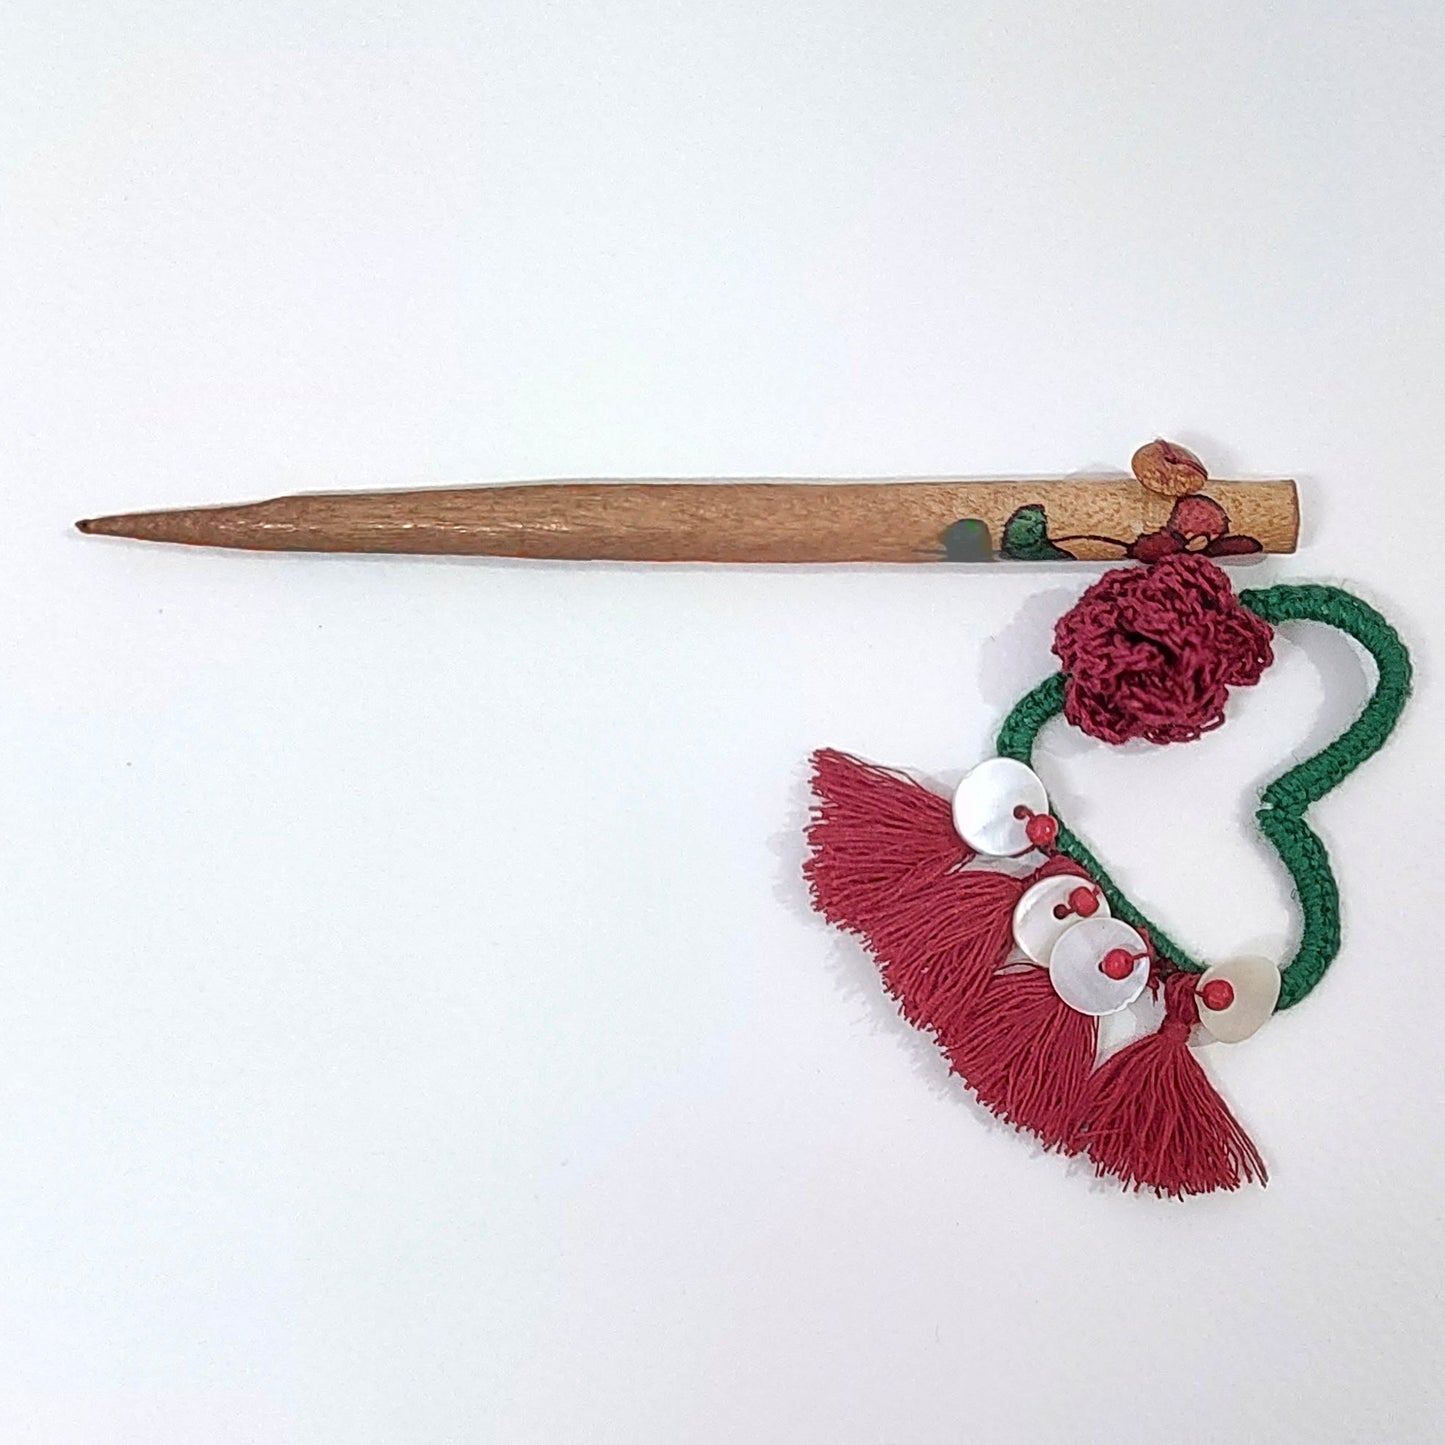 Wooden Hair Stick Rosy Red And Green at Kamakhyaa by Ikriit'm. This item is Accessories, Cotton Yarn, Green, Hair Accessory, Ikriit'm, Red, Wood